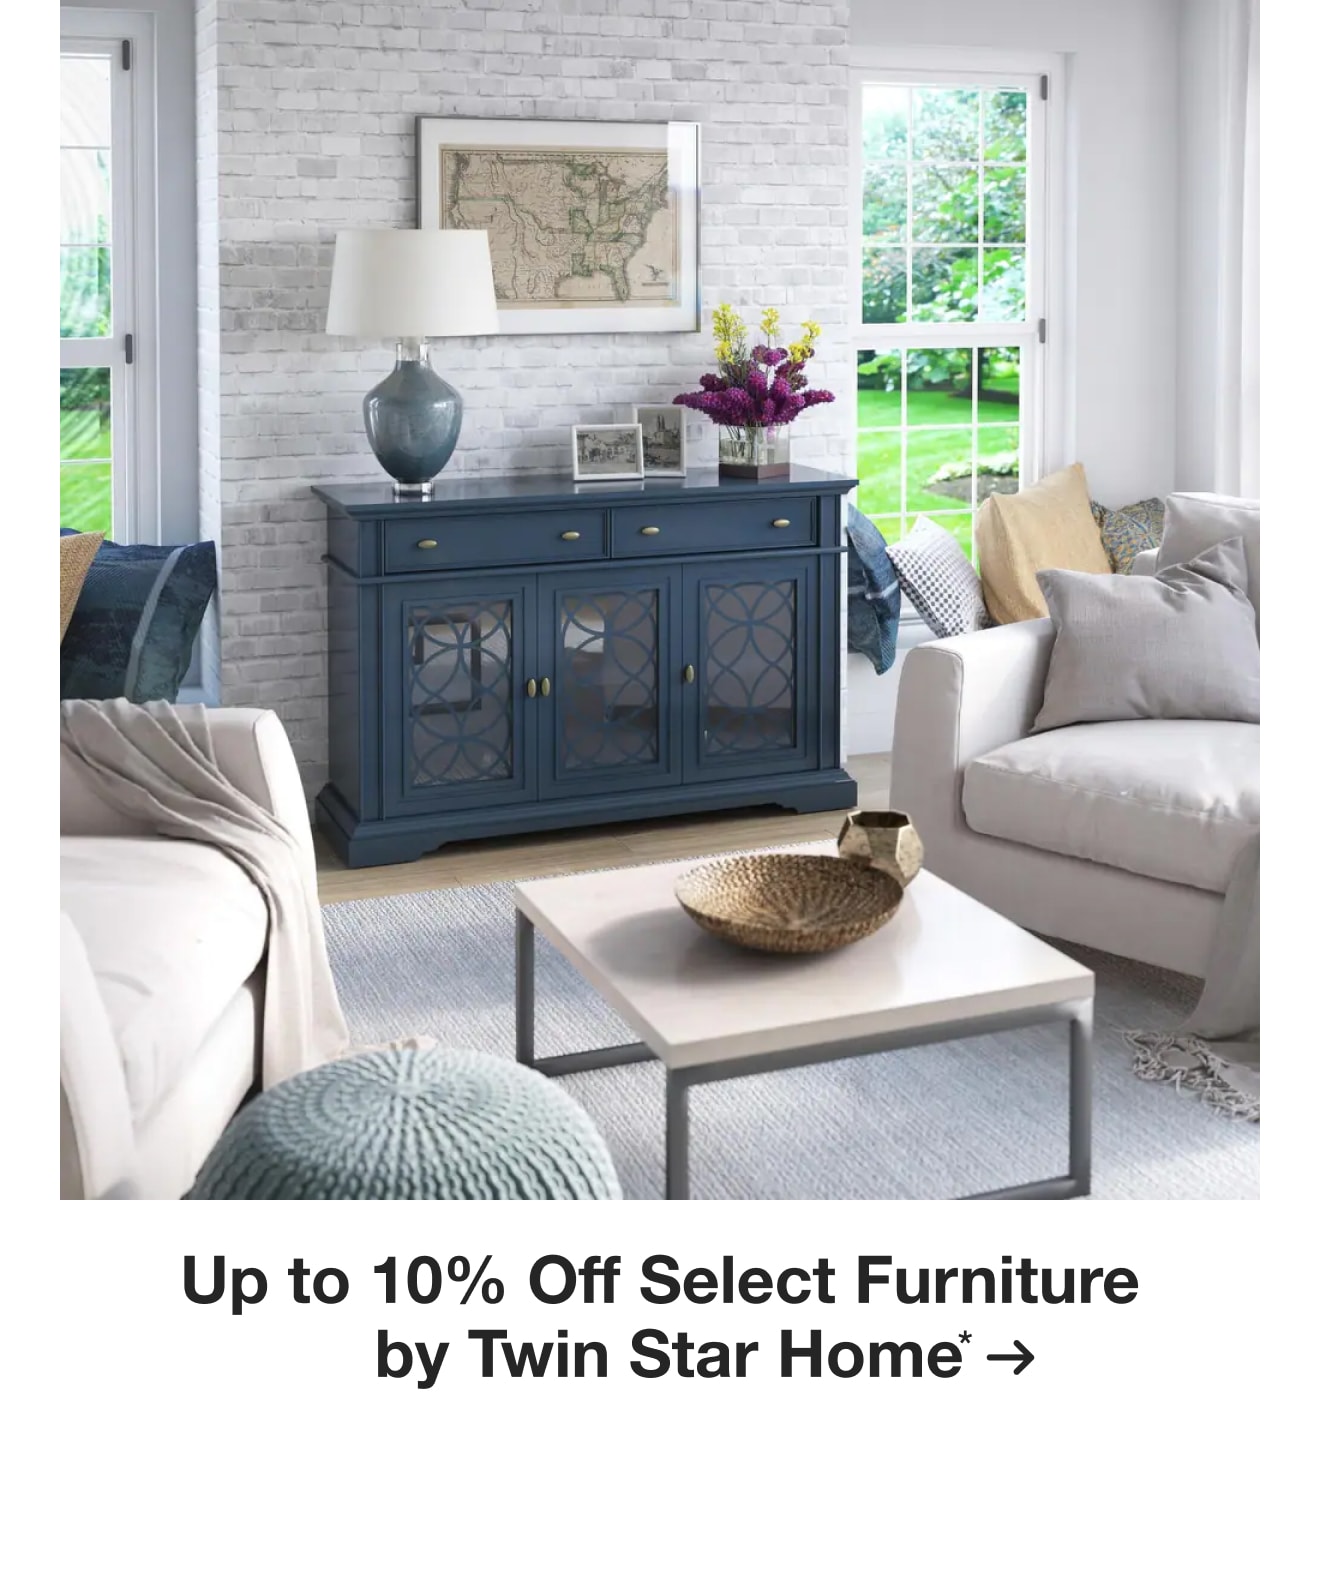 Up to 10% Off Select Furniture by Twin Star Home*